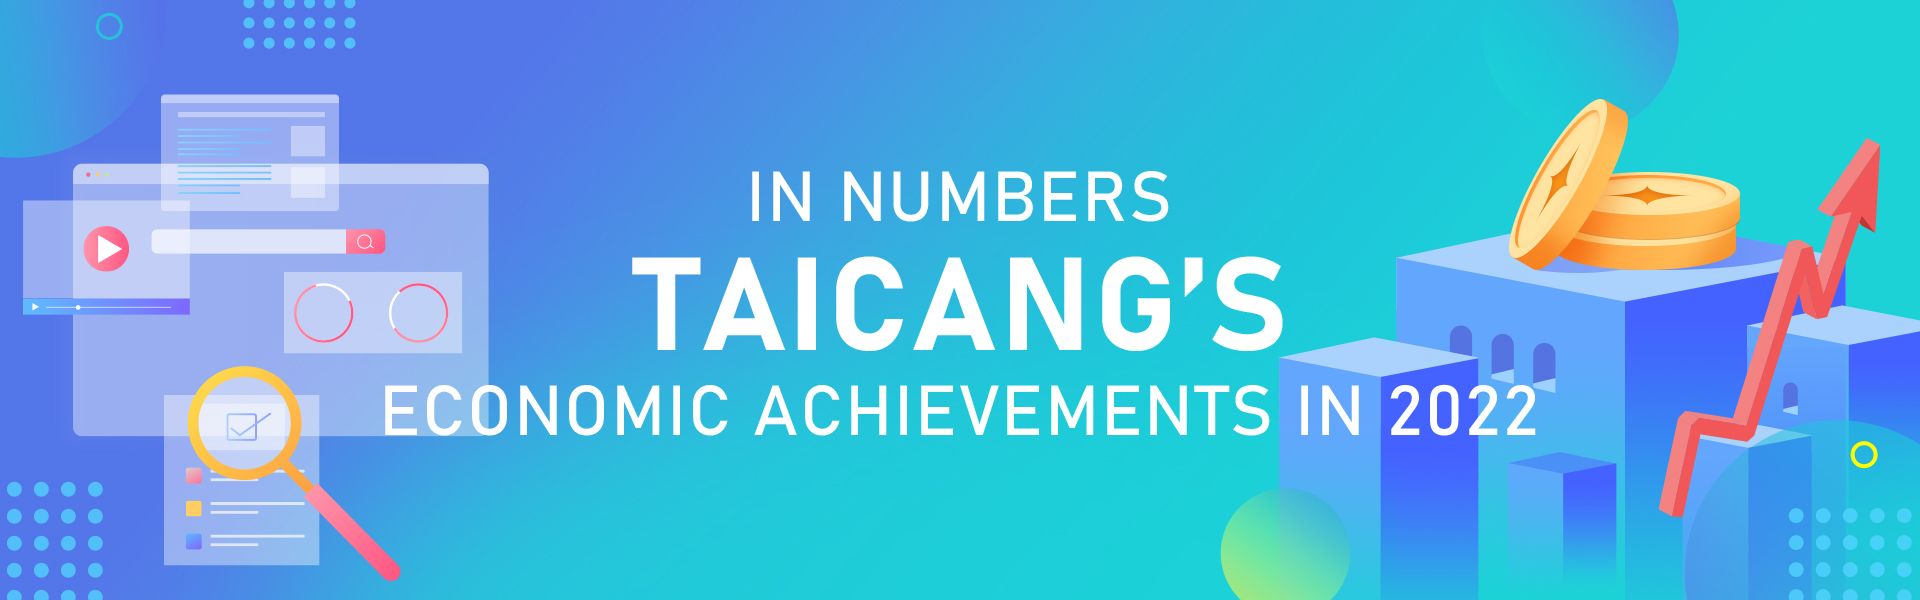 In numbers: Taicang's economic achievements in 2022 